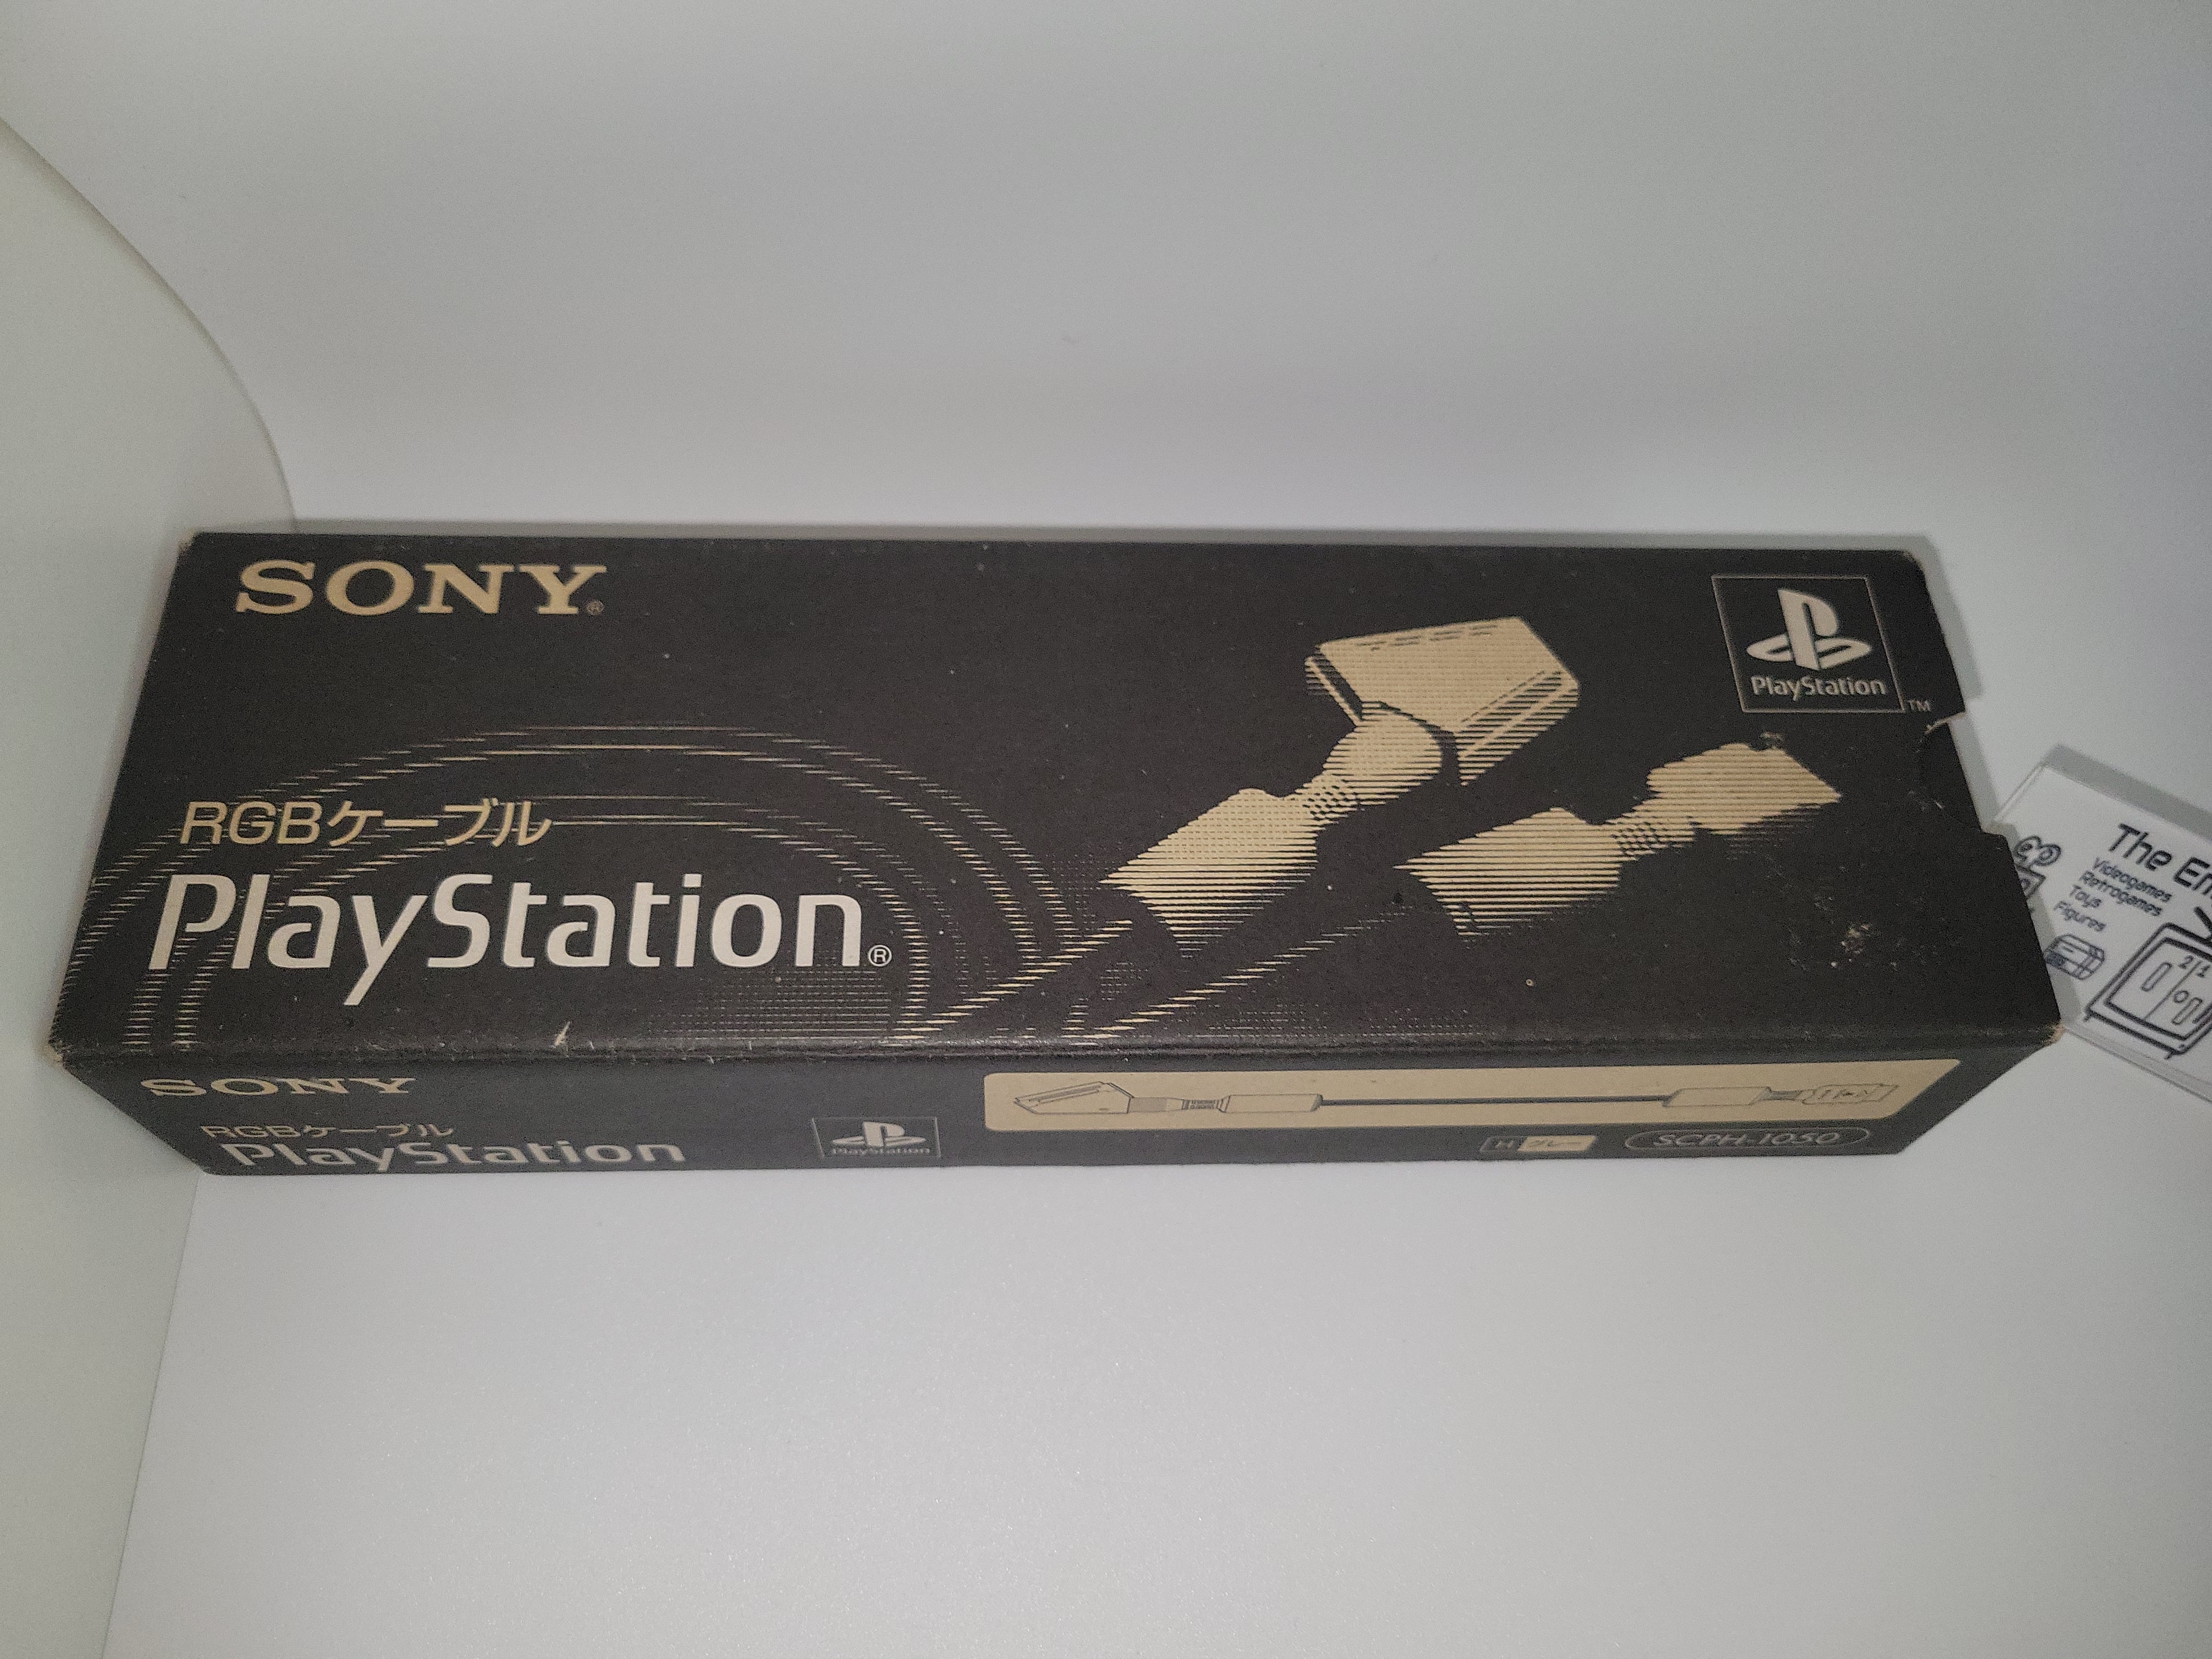 Sony Original Scph-1050 RGB (japan) Cable - Sony PS1 Playstation